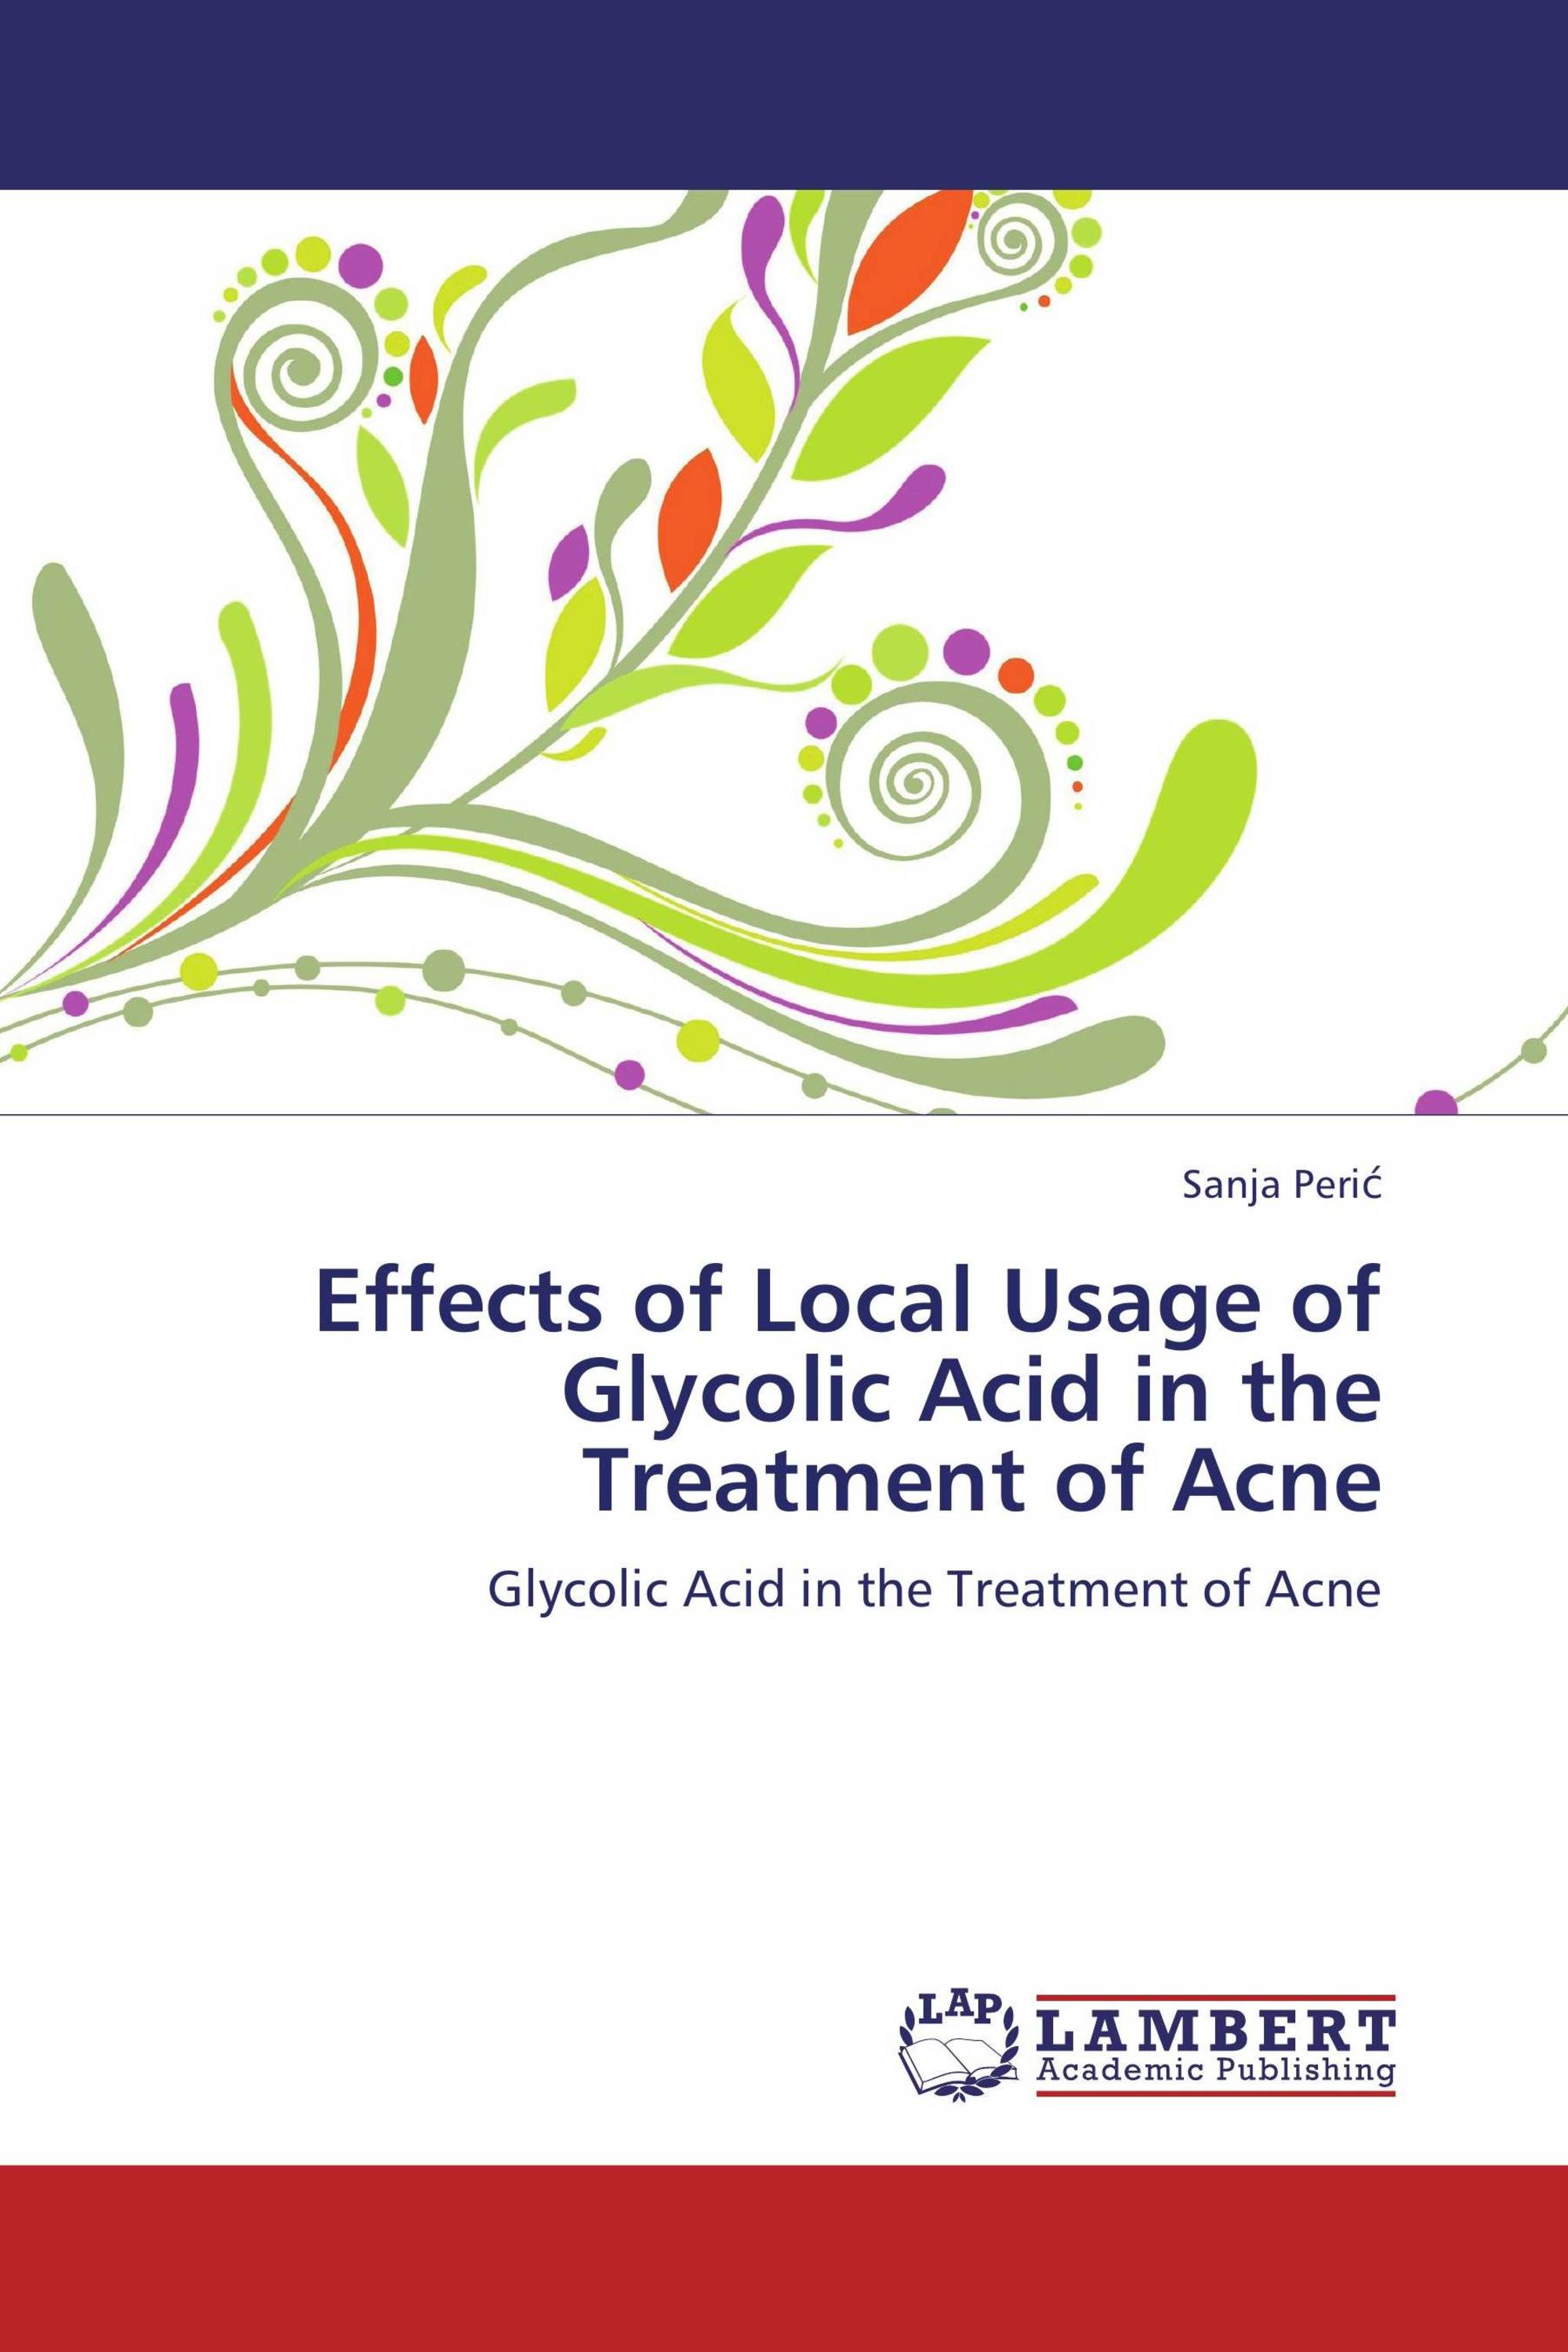 Effects of Local Usage of Glycolic Acid in the Treatment of Acne